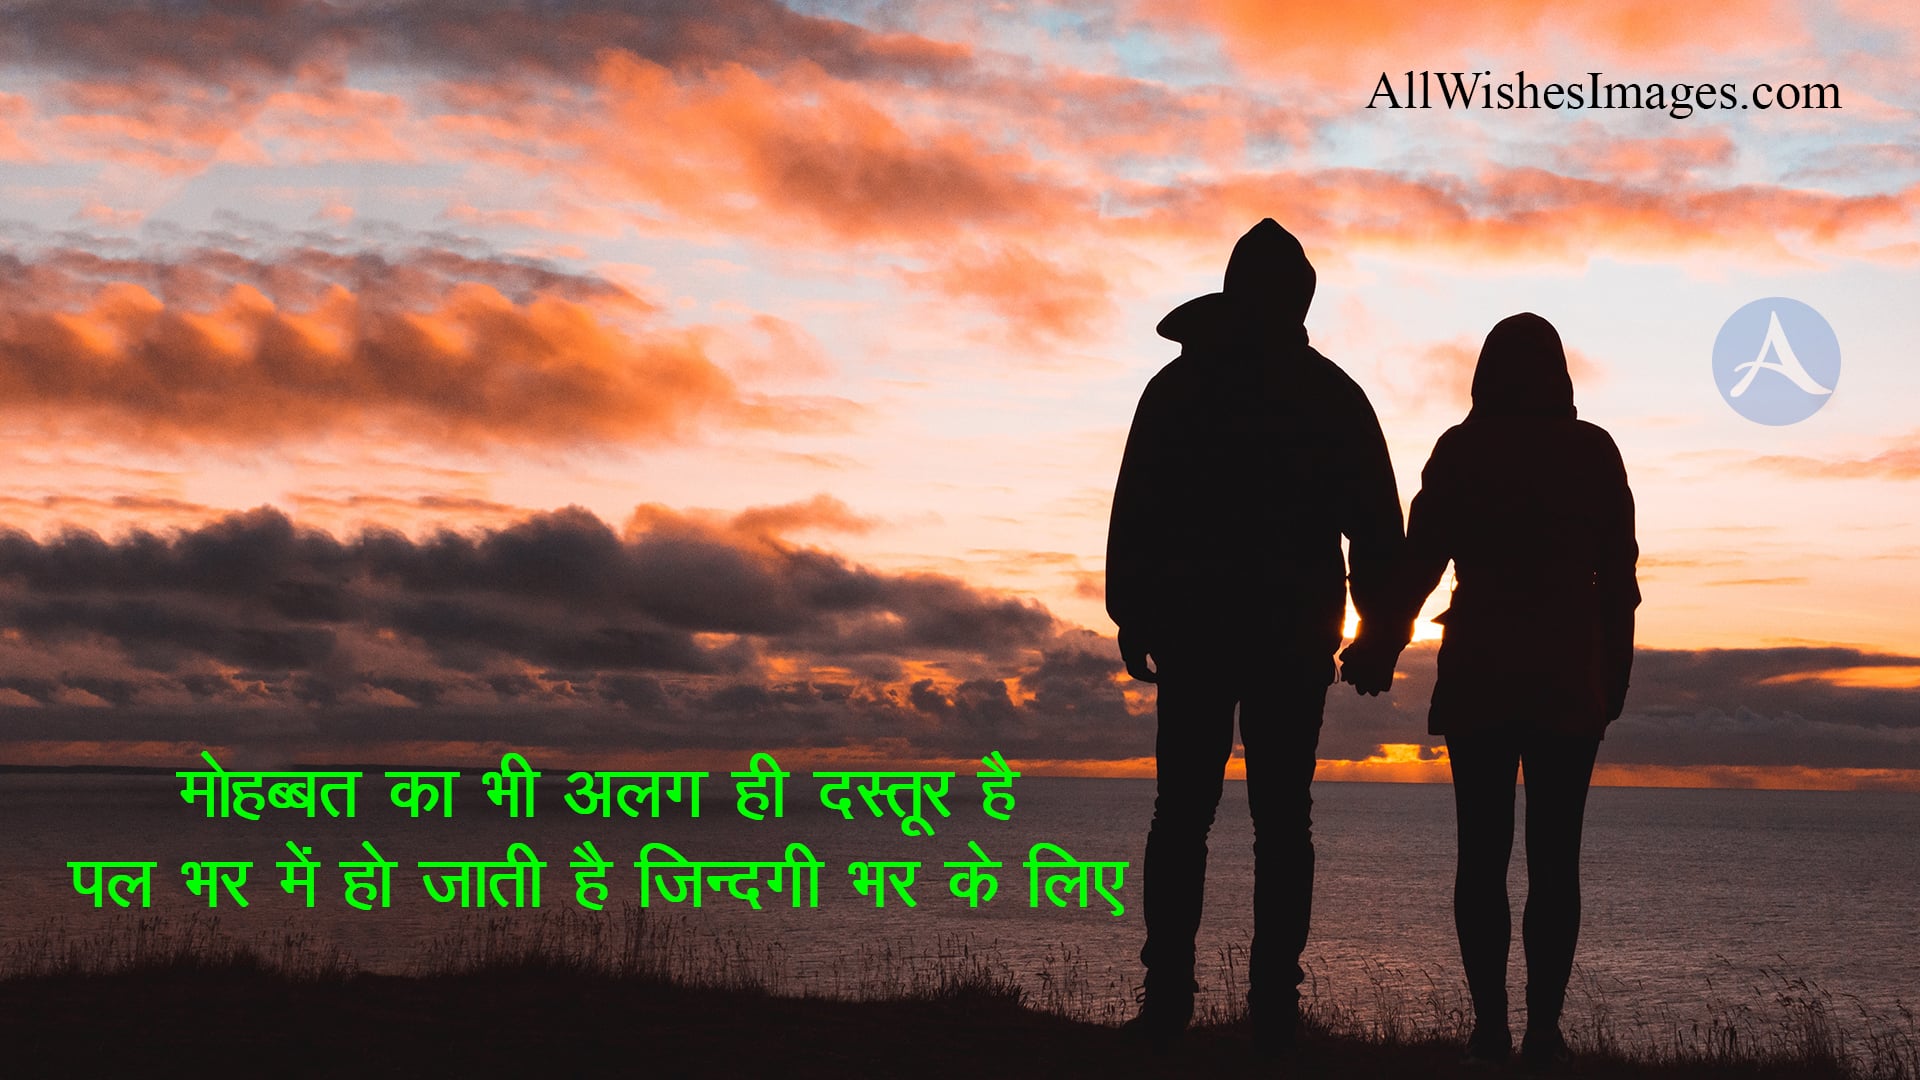 Couple Image With Love Quotes In Hindi - All Wishes Images - Images for  WhatsApp